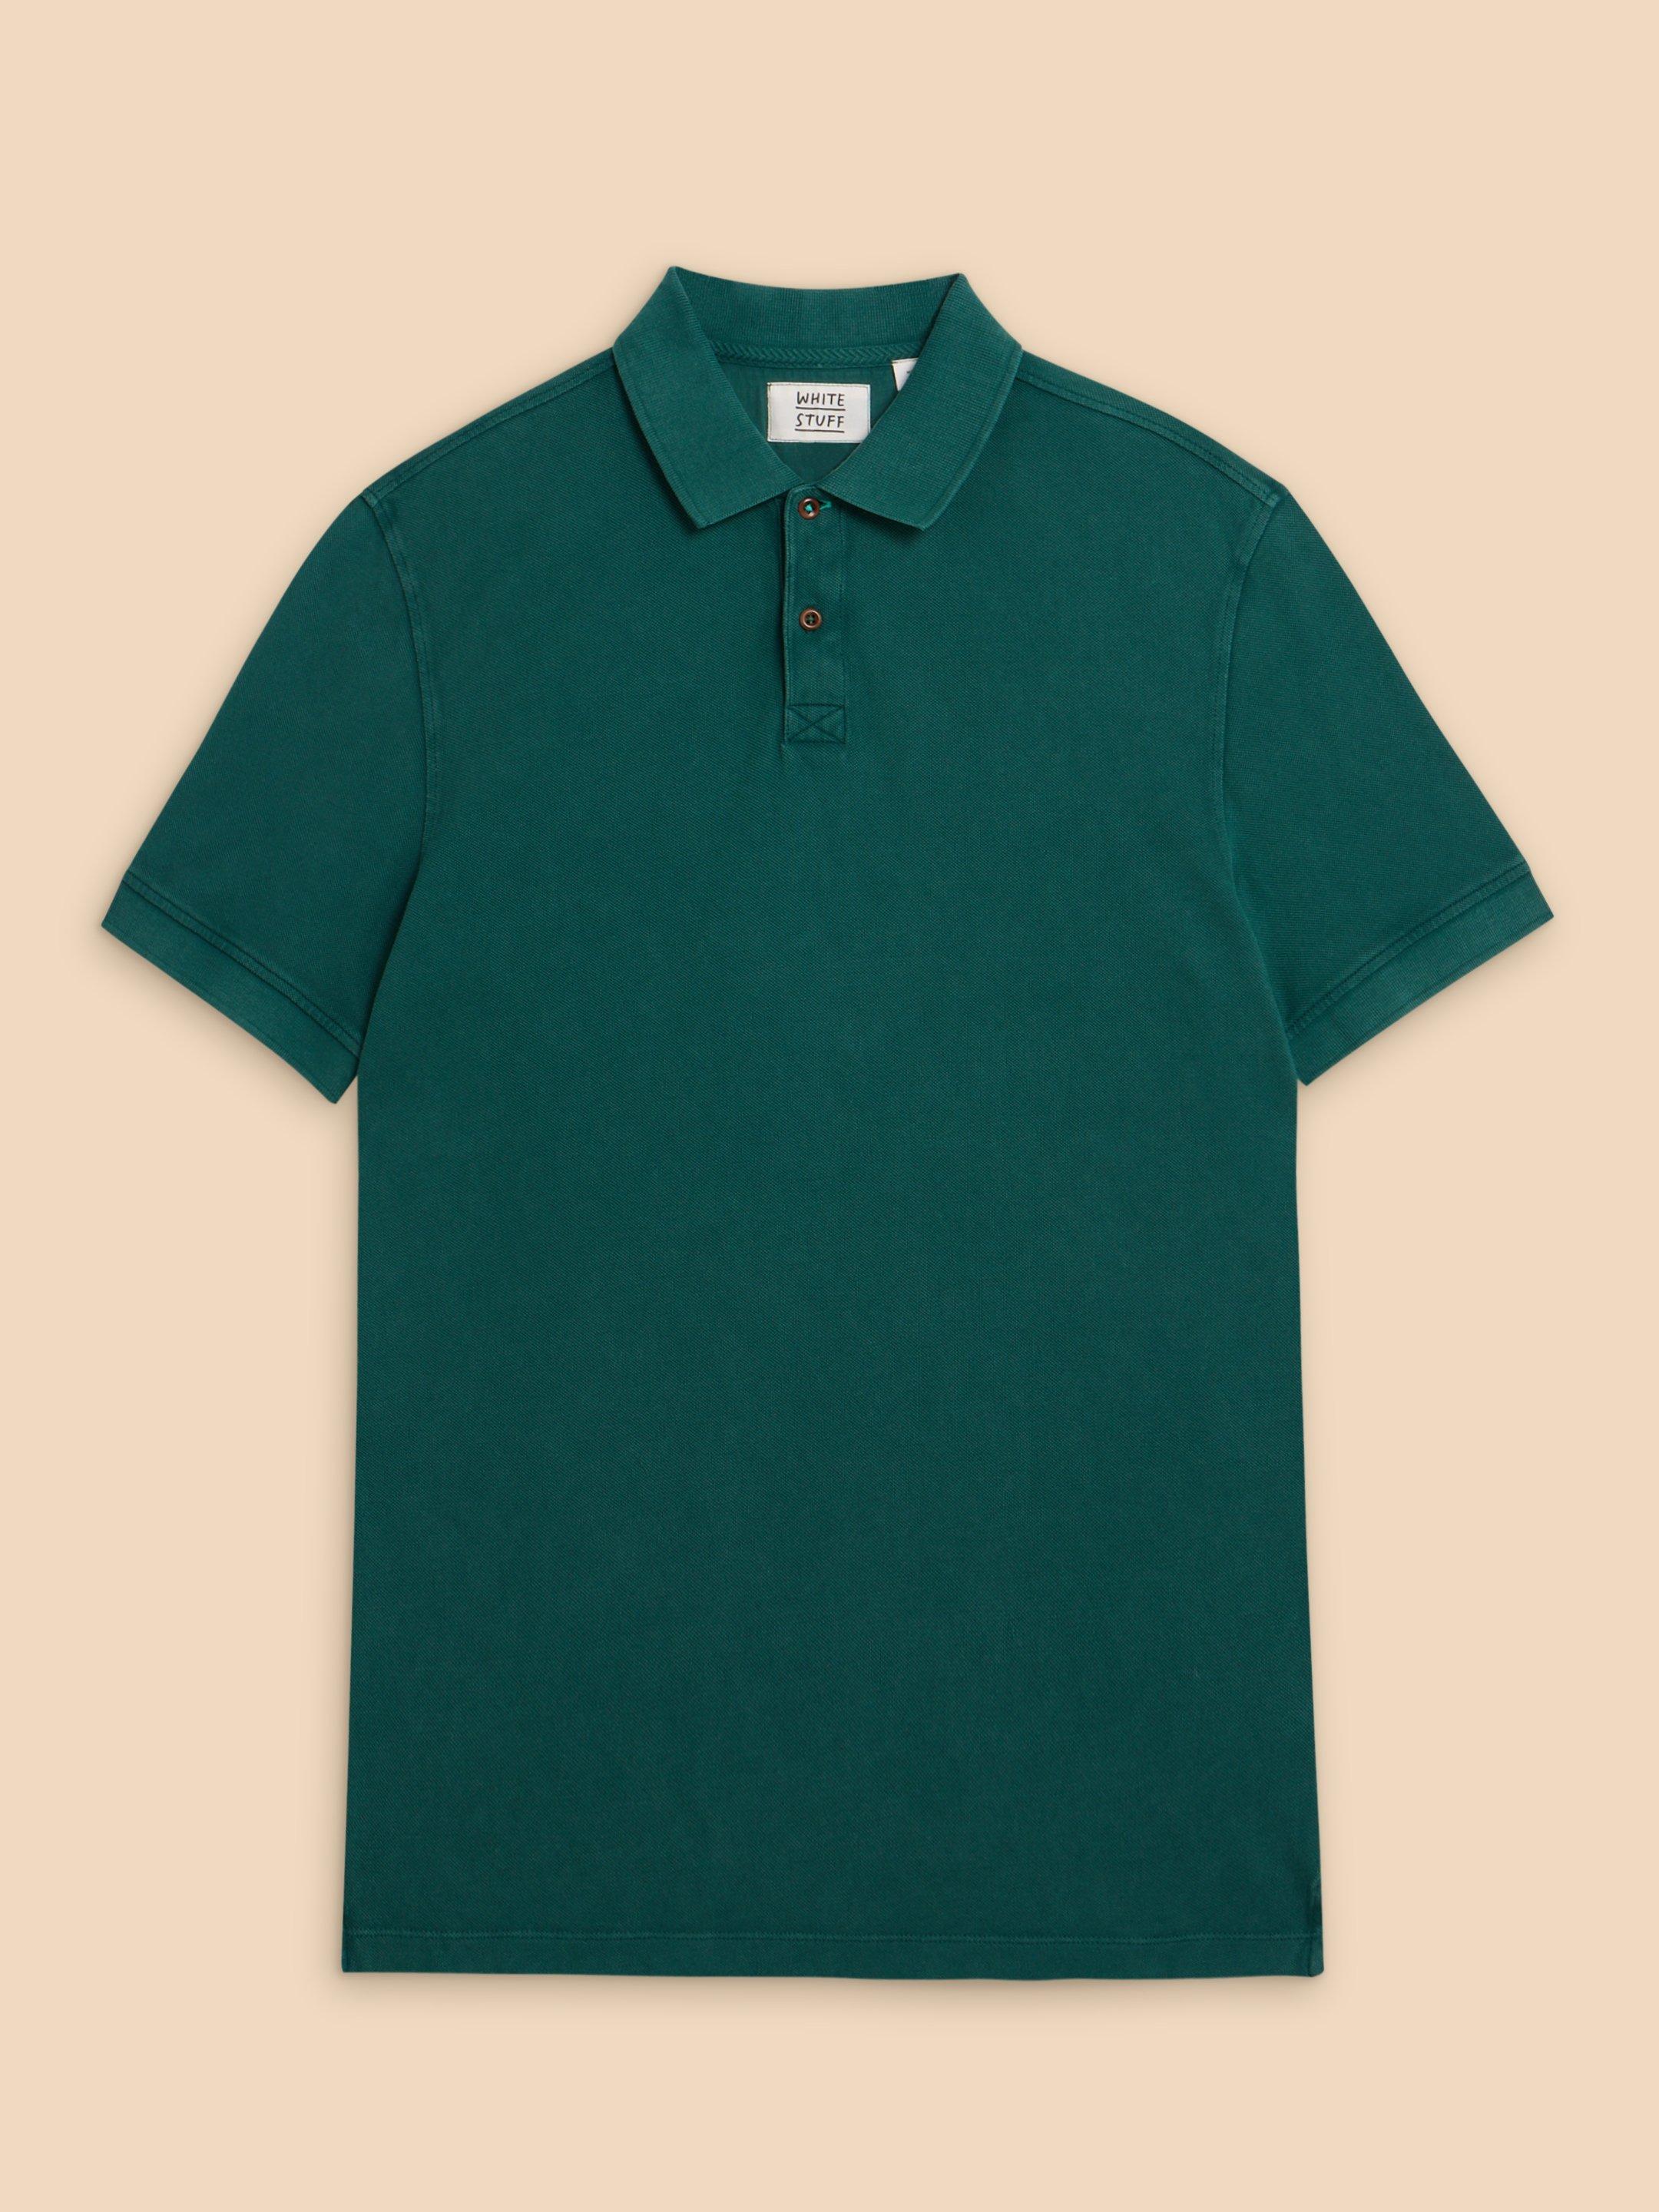 Utility Polo in DK TEAL - FLAT FRONT